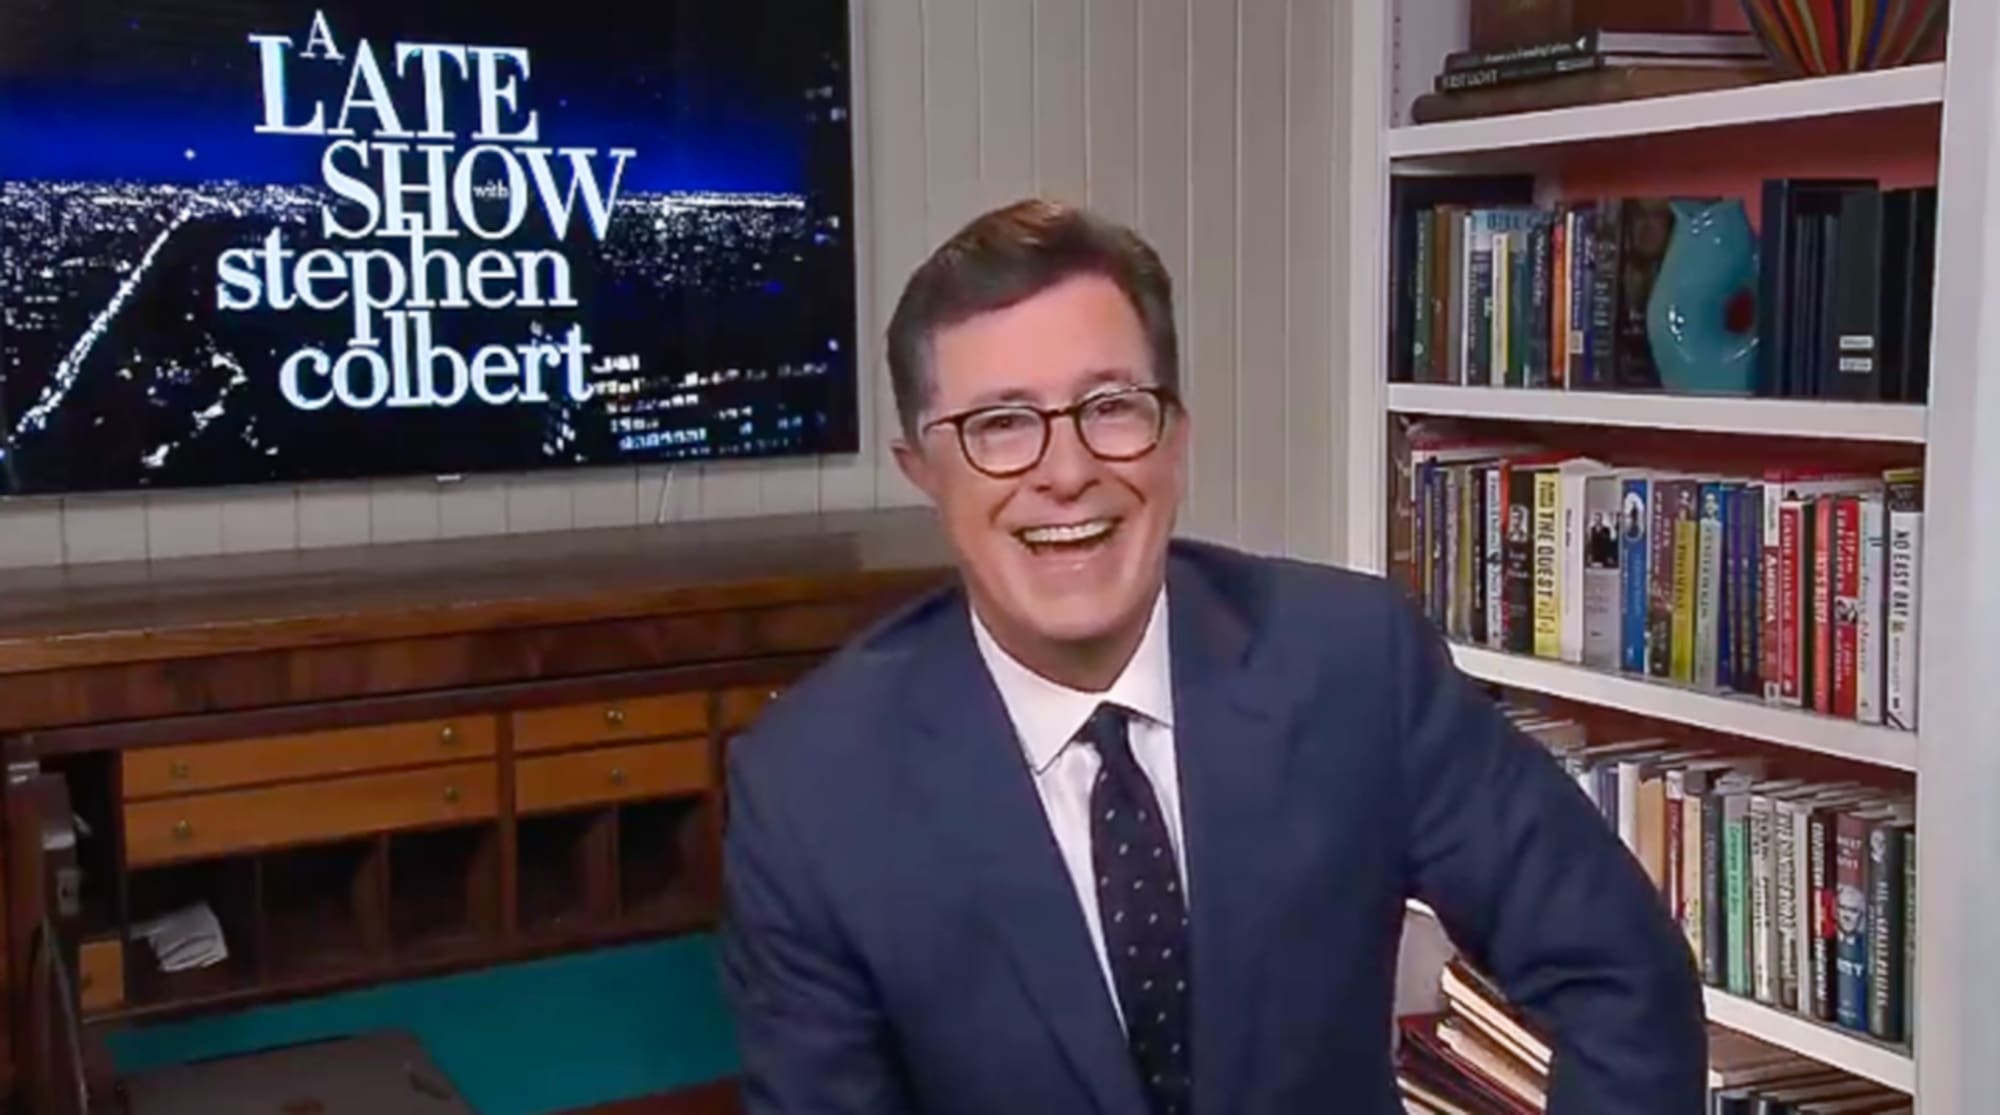 Is The Late Show with Stephen Colbert new tonight, November 7?